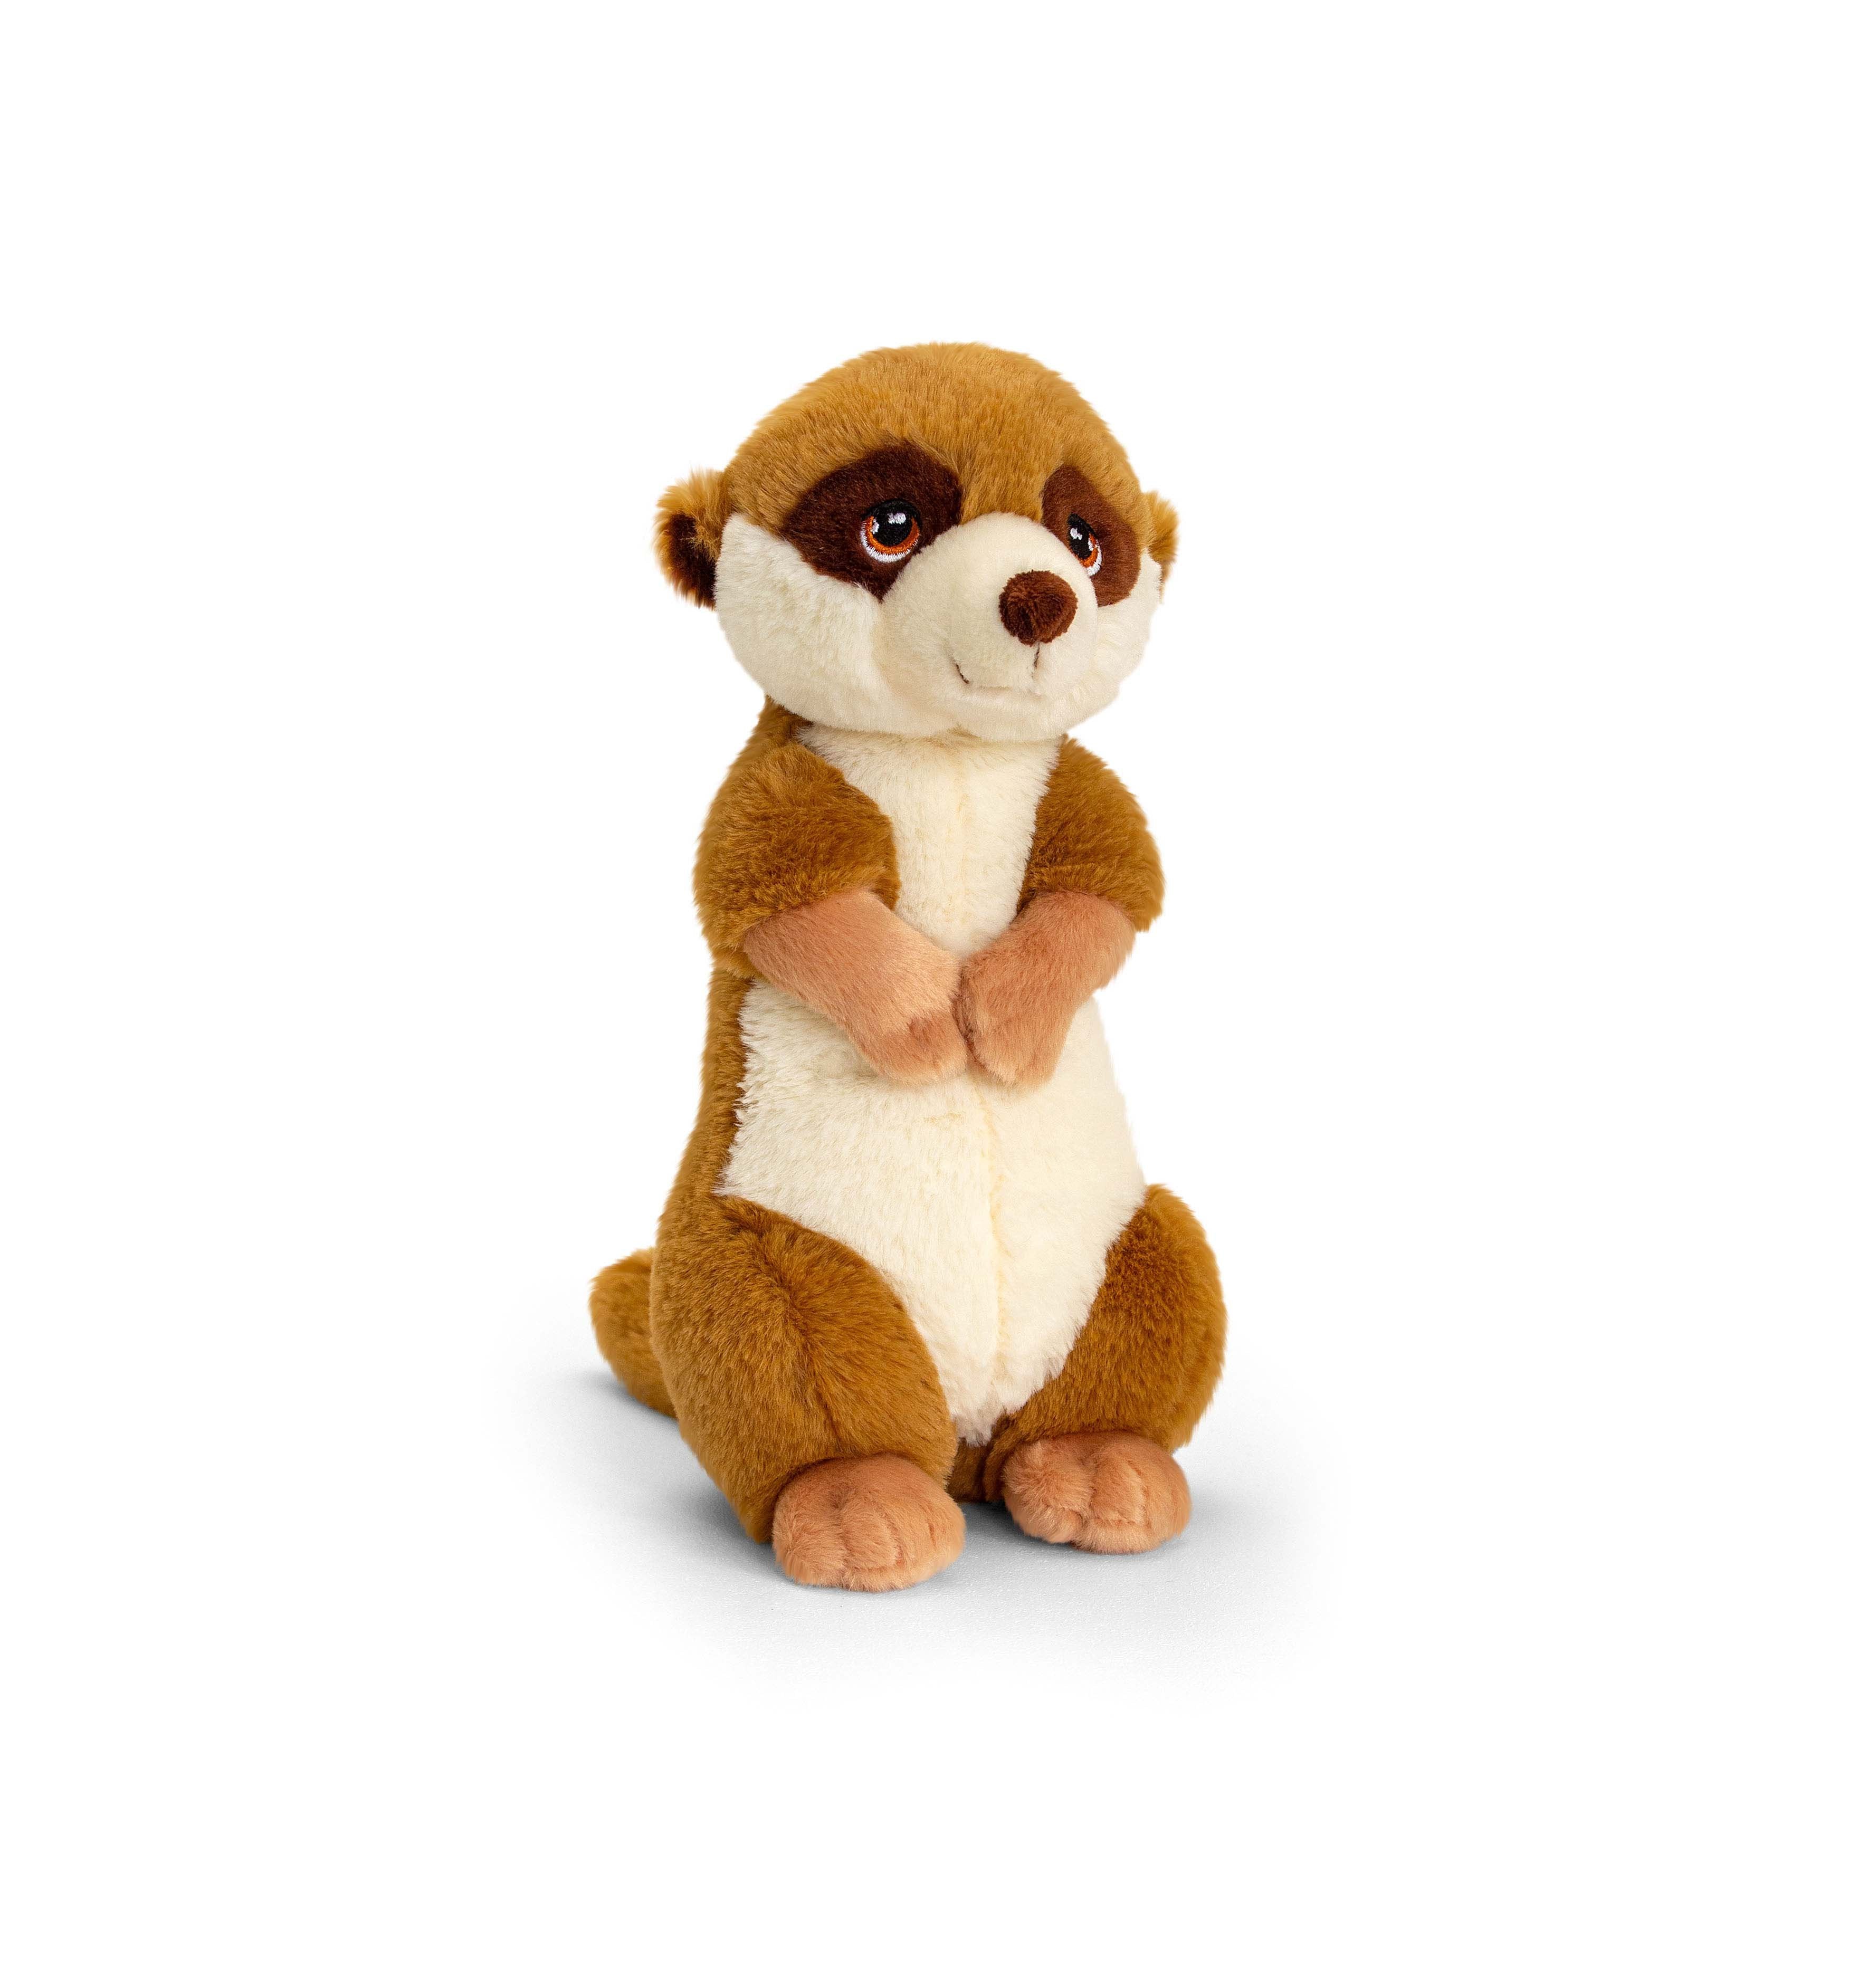 Meerkat Recycled Plastic Soft Toy, 18cm - eco friendly toy